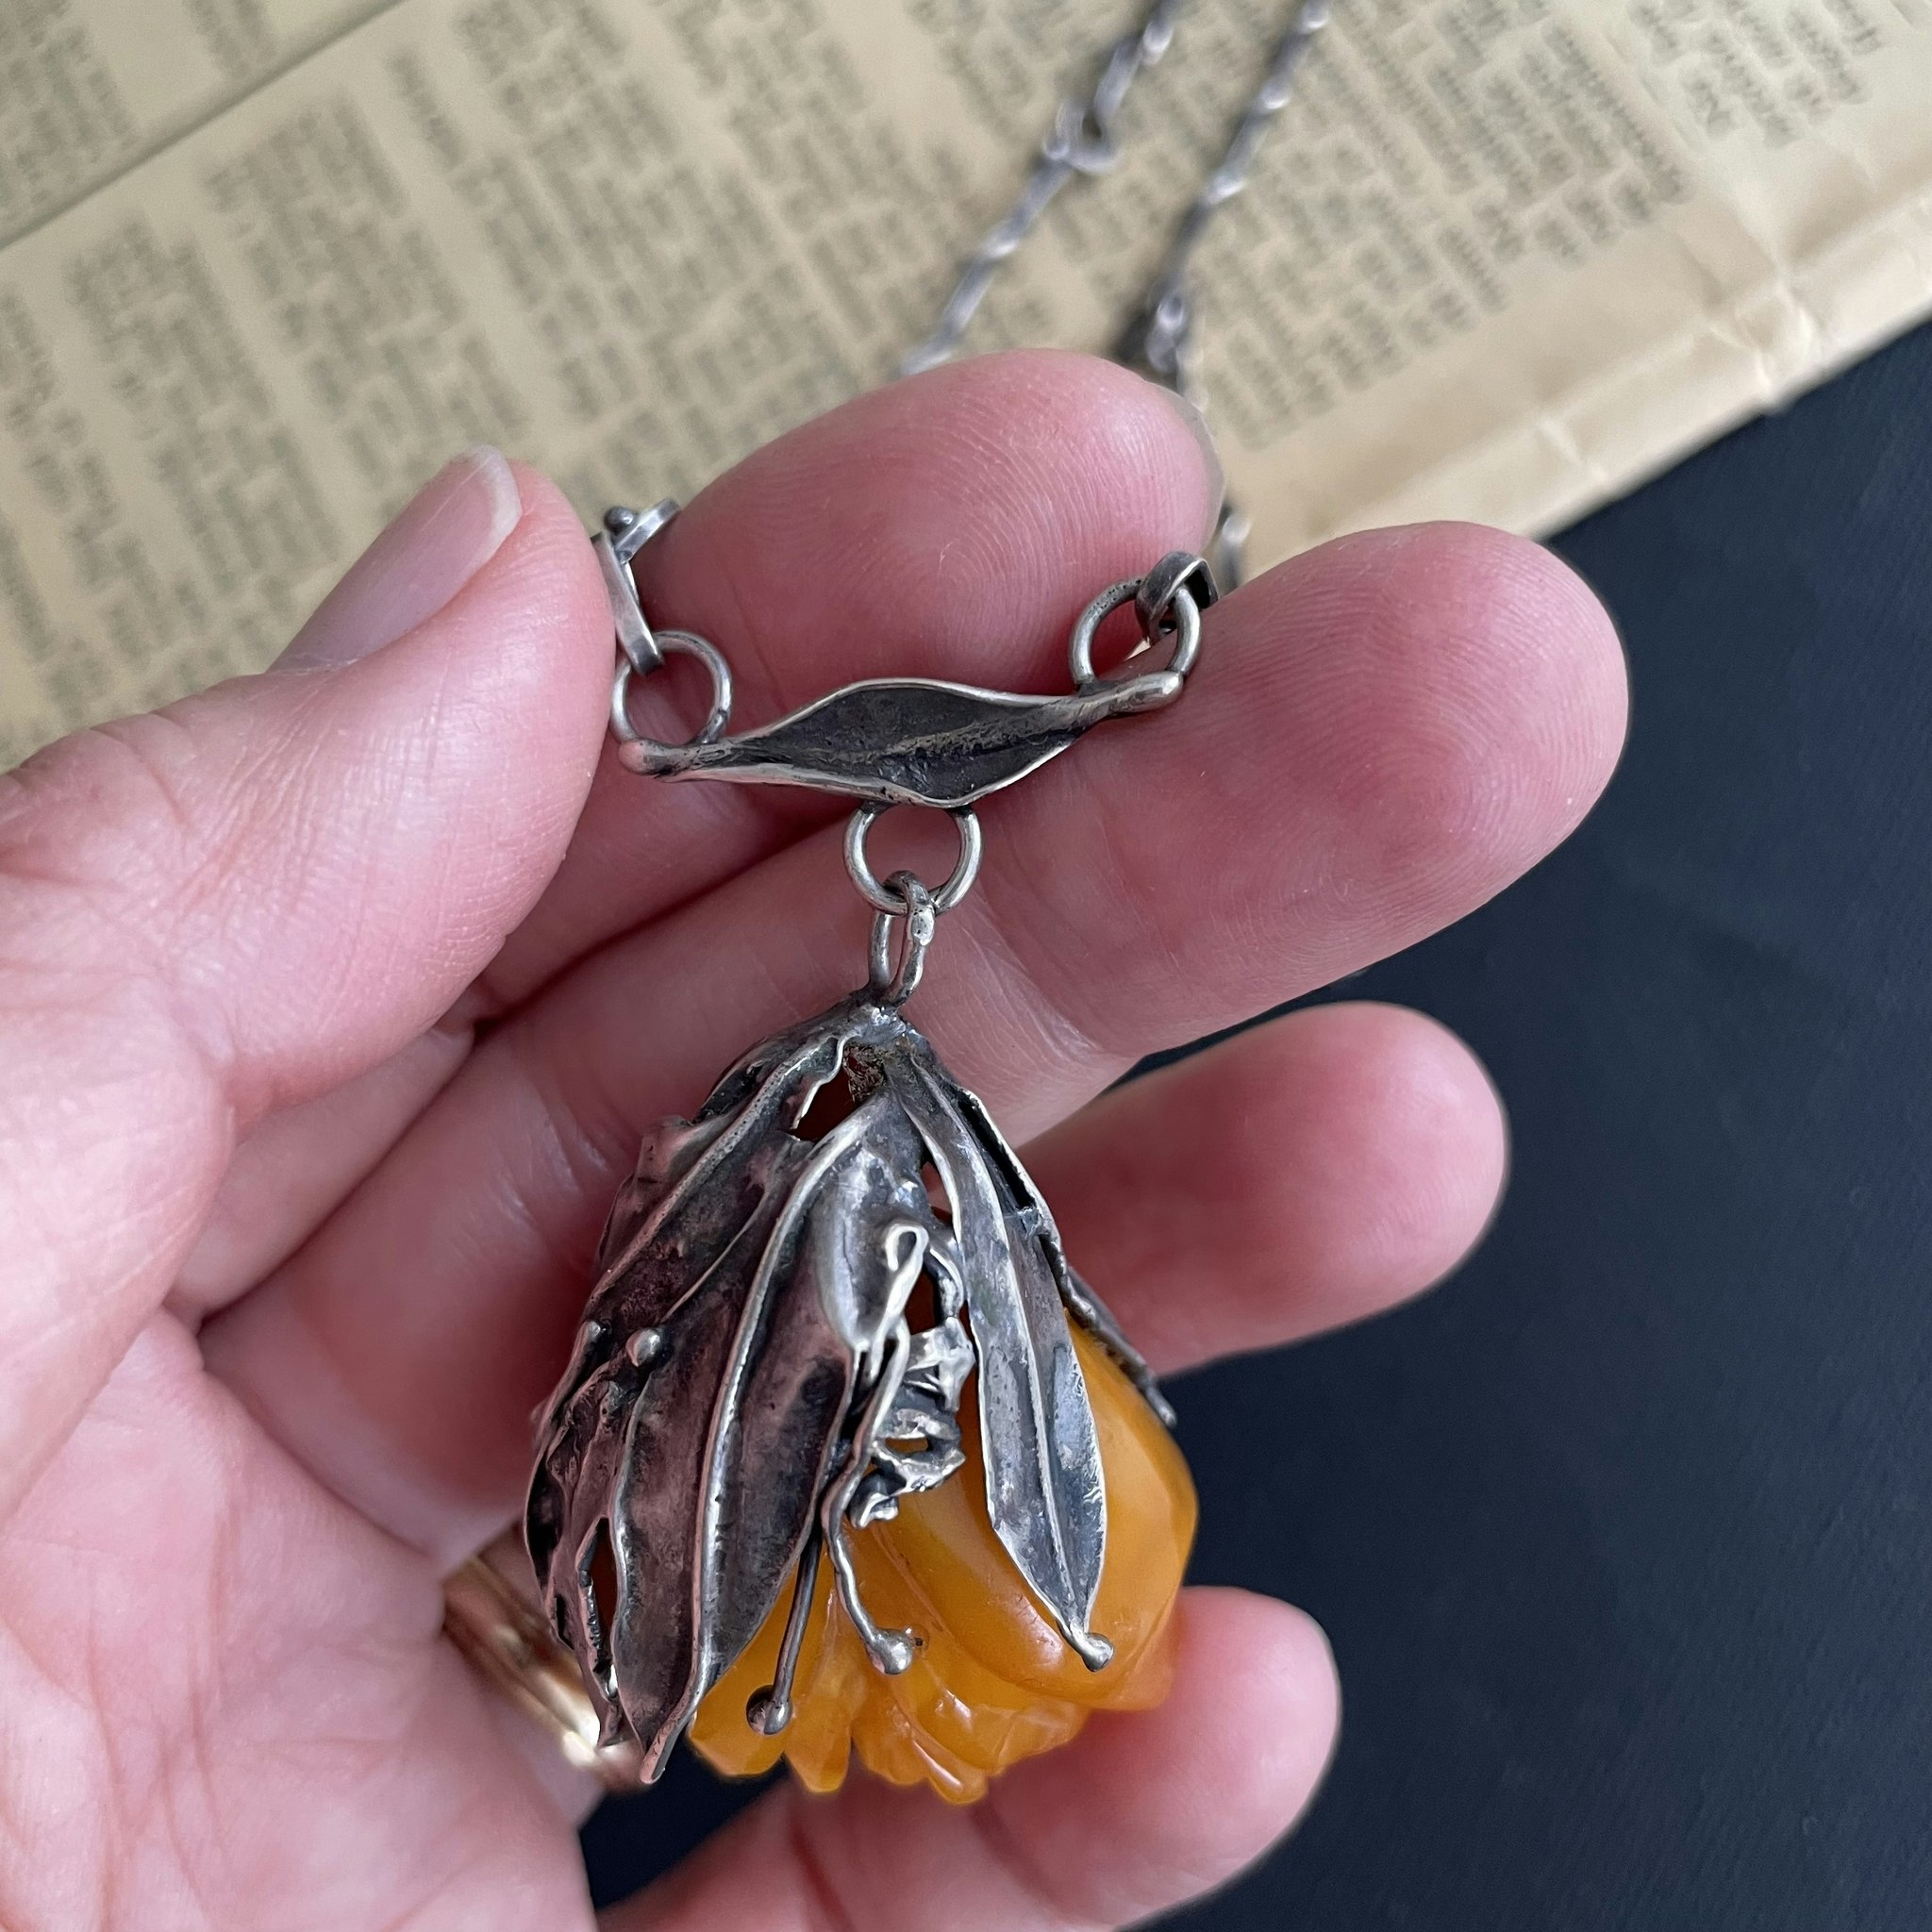 Natural amber pendant with silver egg yolk hand carved flower 37g #1758